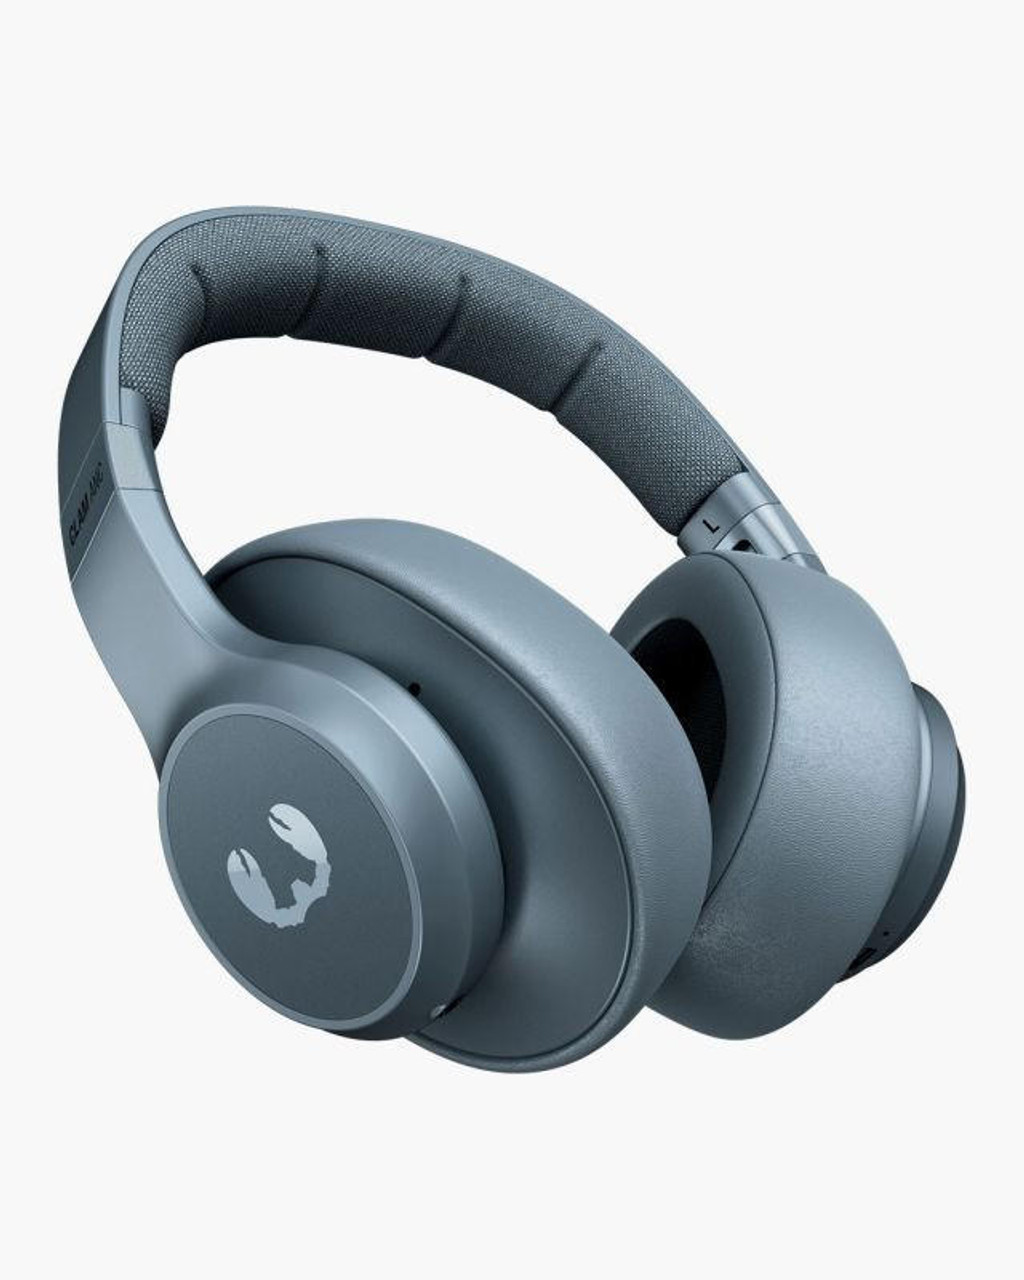 2 ANC Wireless Clam Blue | over-ear Dive | headphones cancelling with 3HP4102DV noise active |